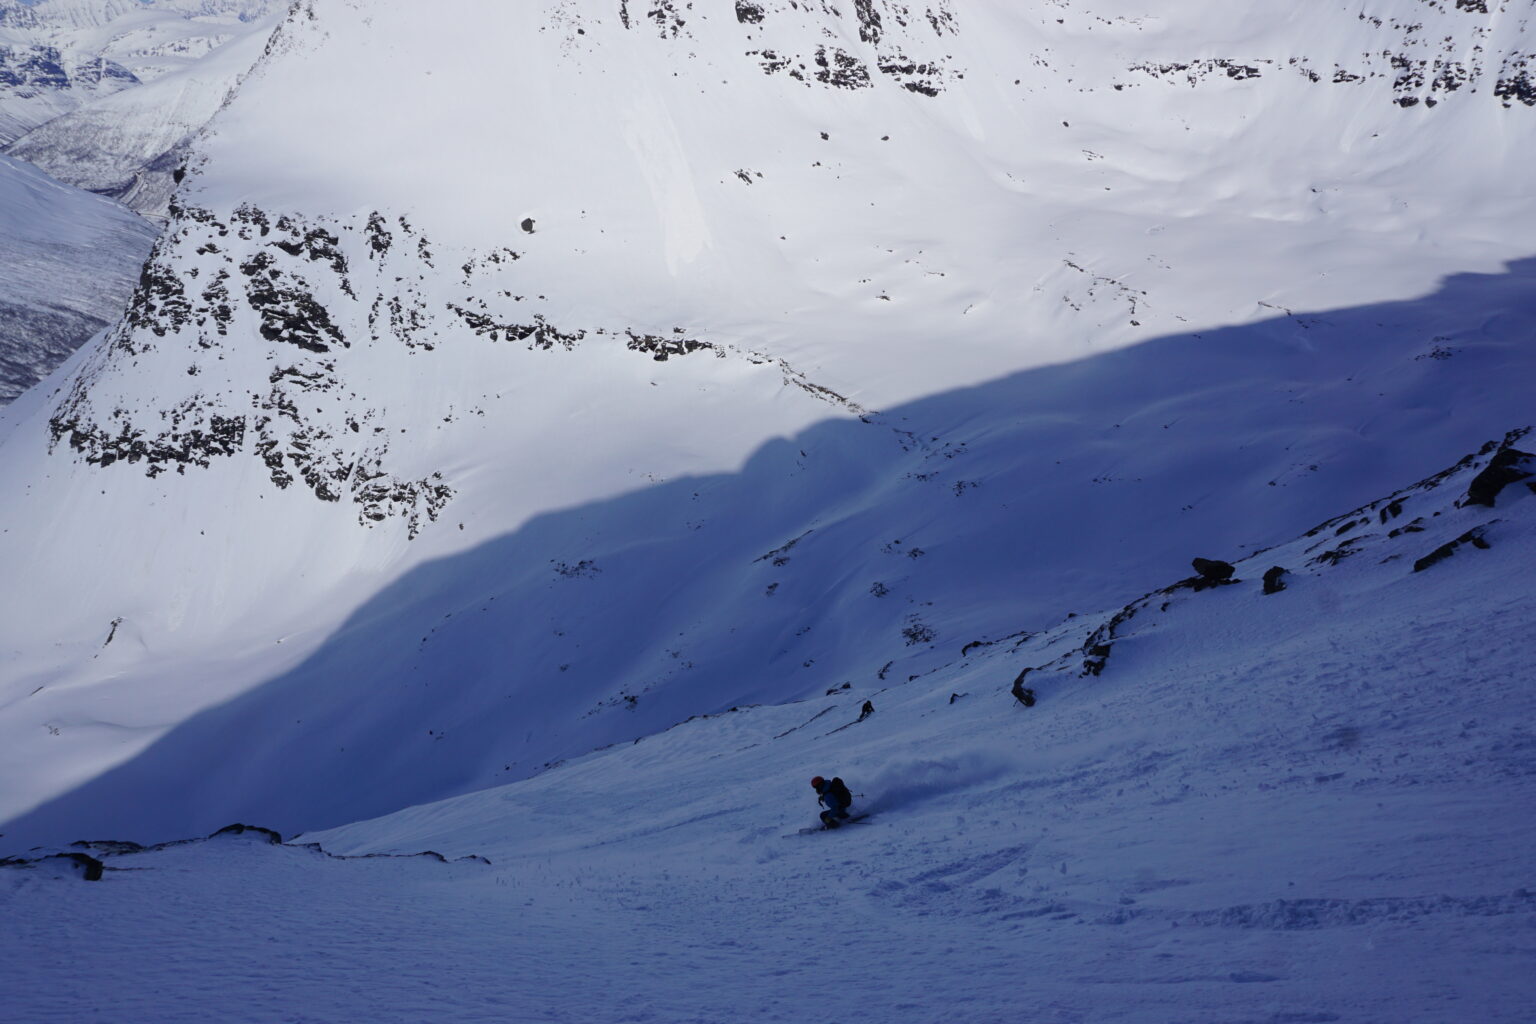 Skiing down the exposed section of the Morning Mission